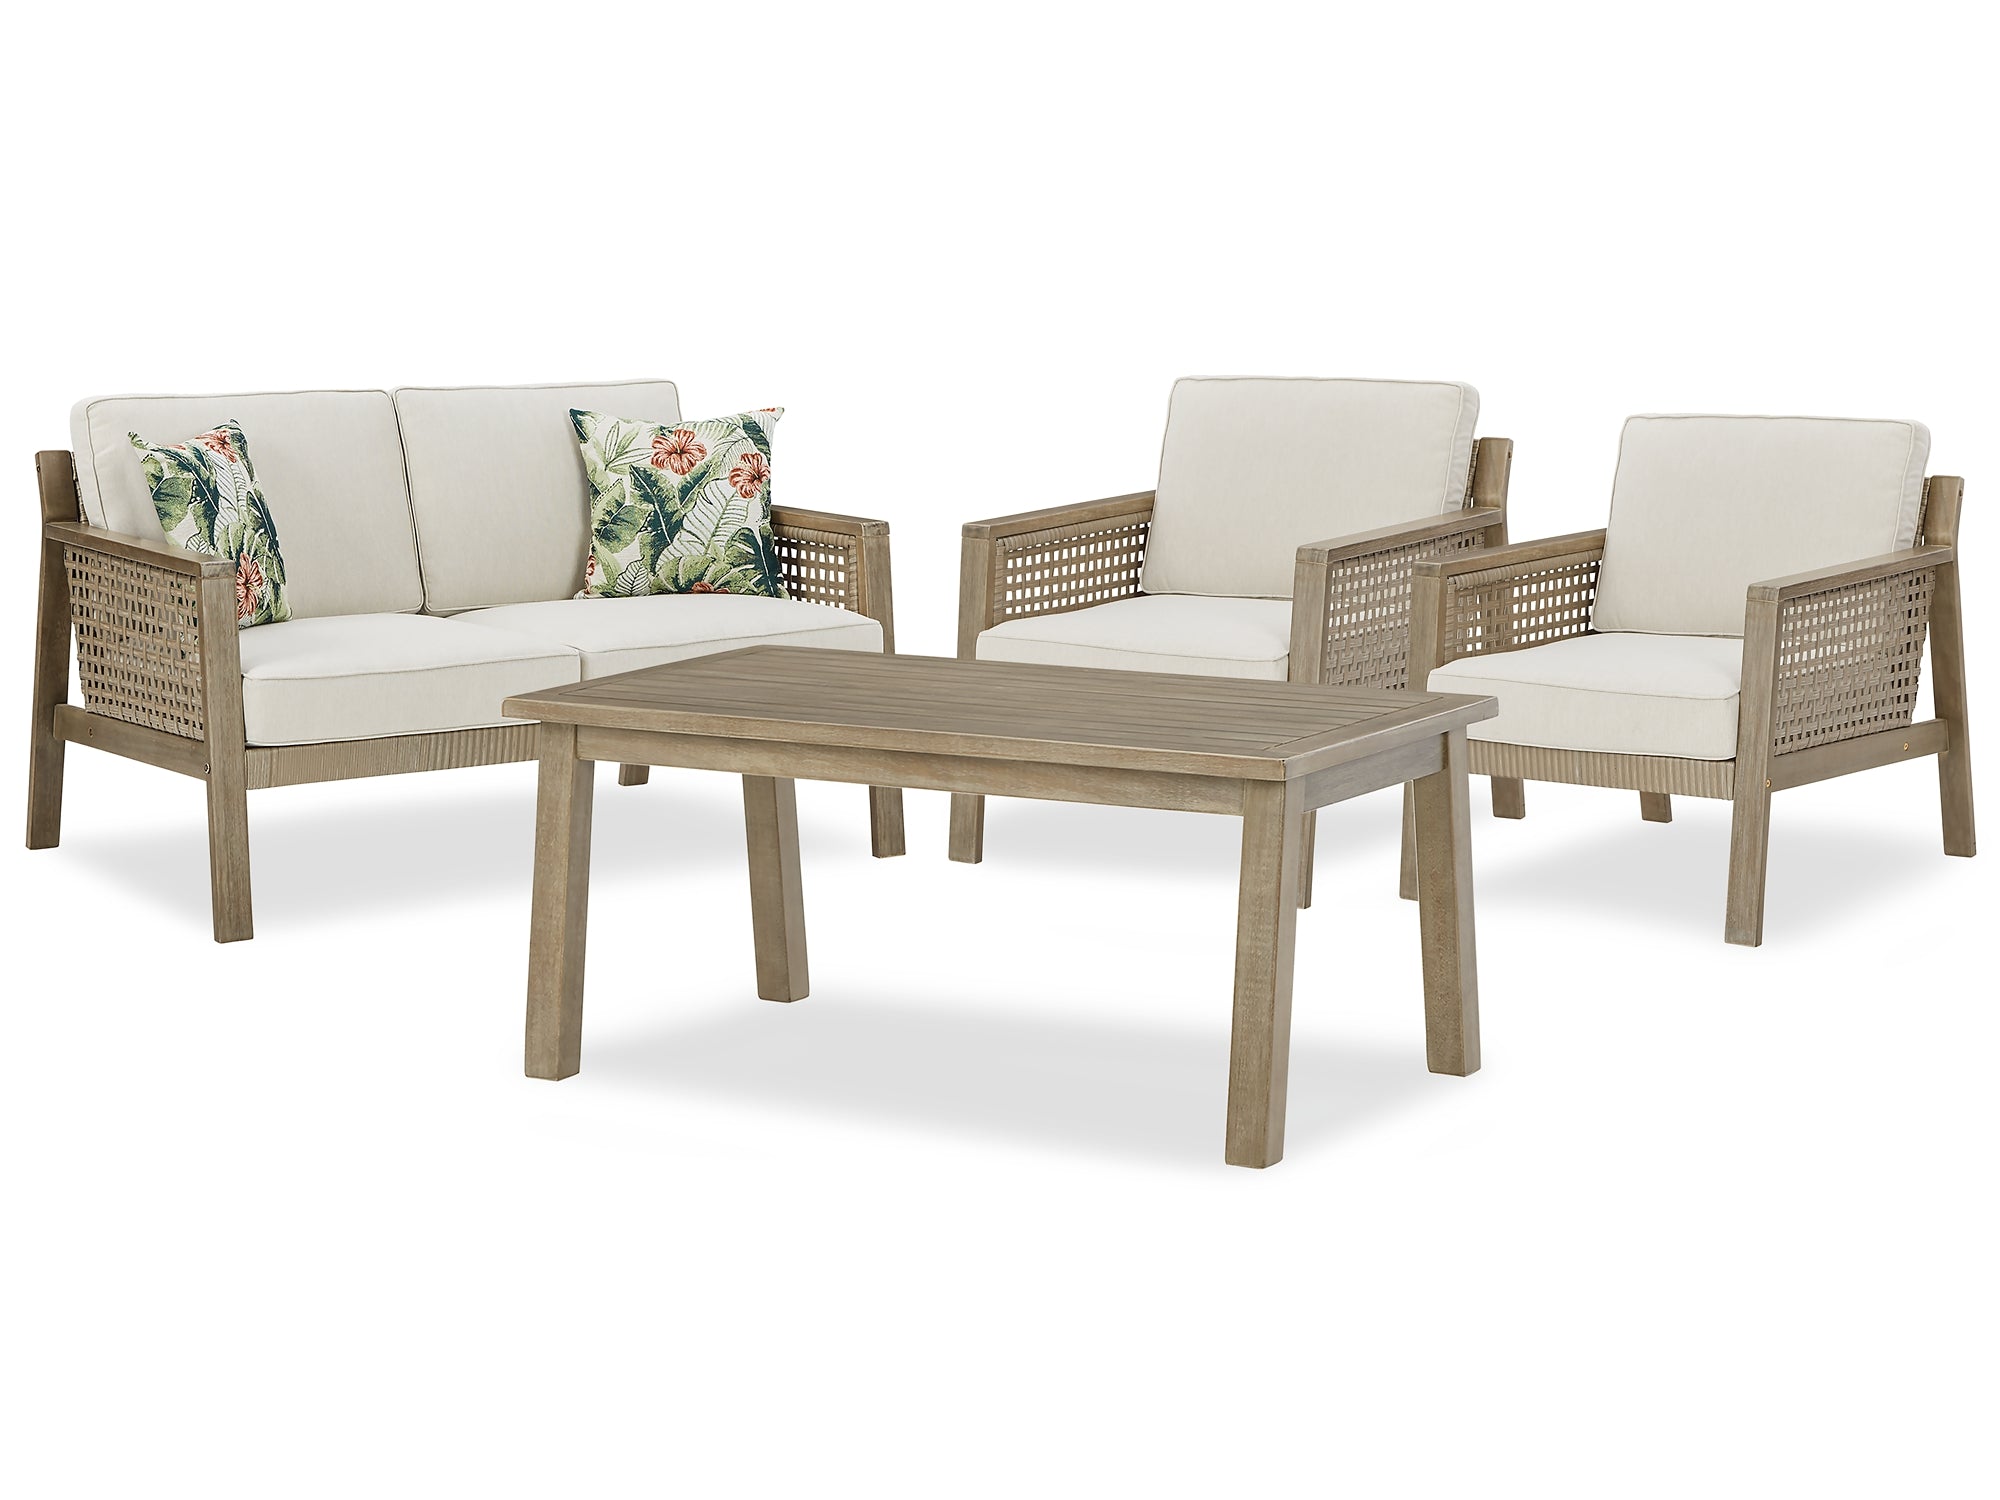 Barn Cove Outdoor Loveseat and 2 Chairs with Coffee Table